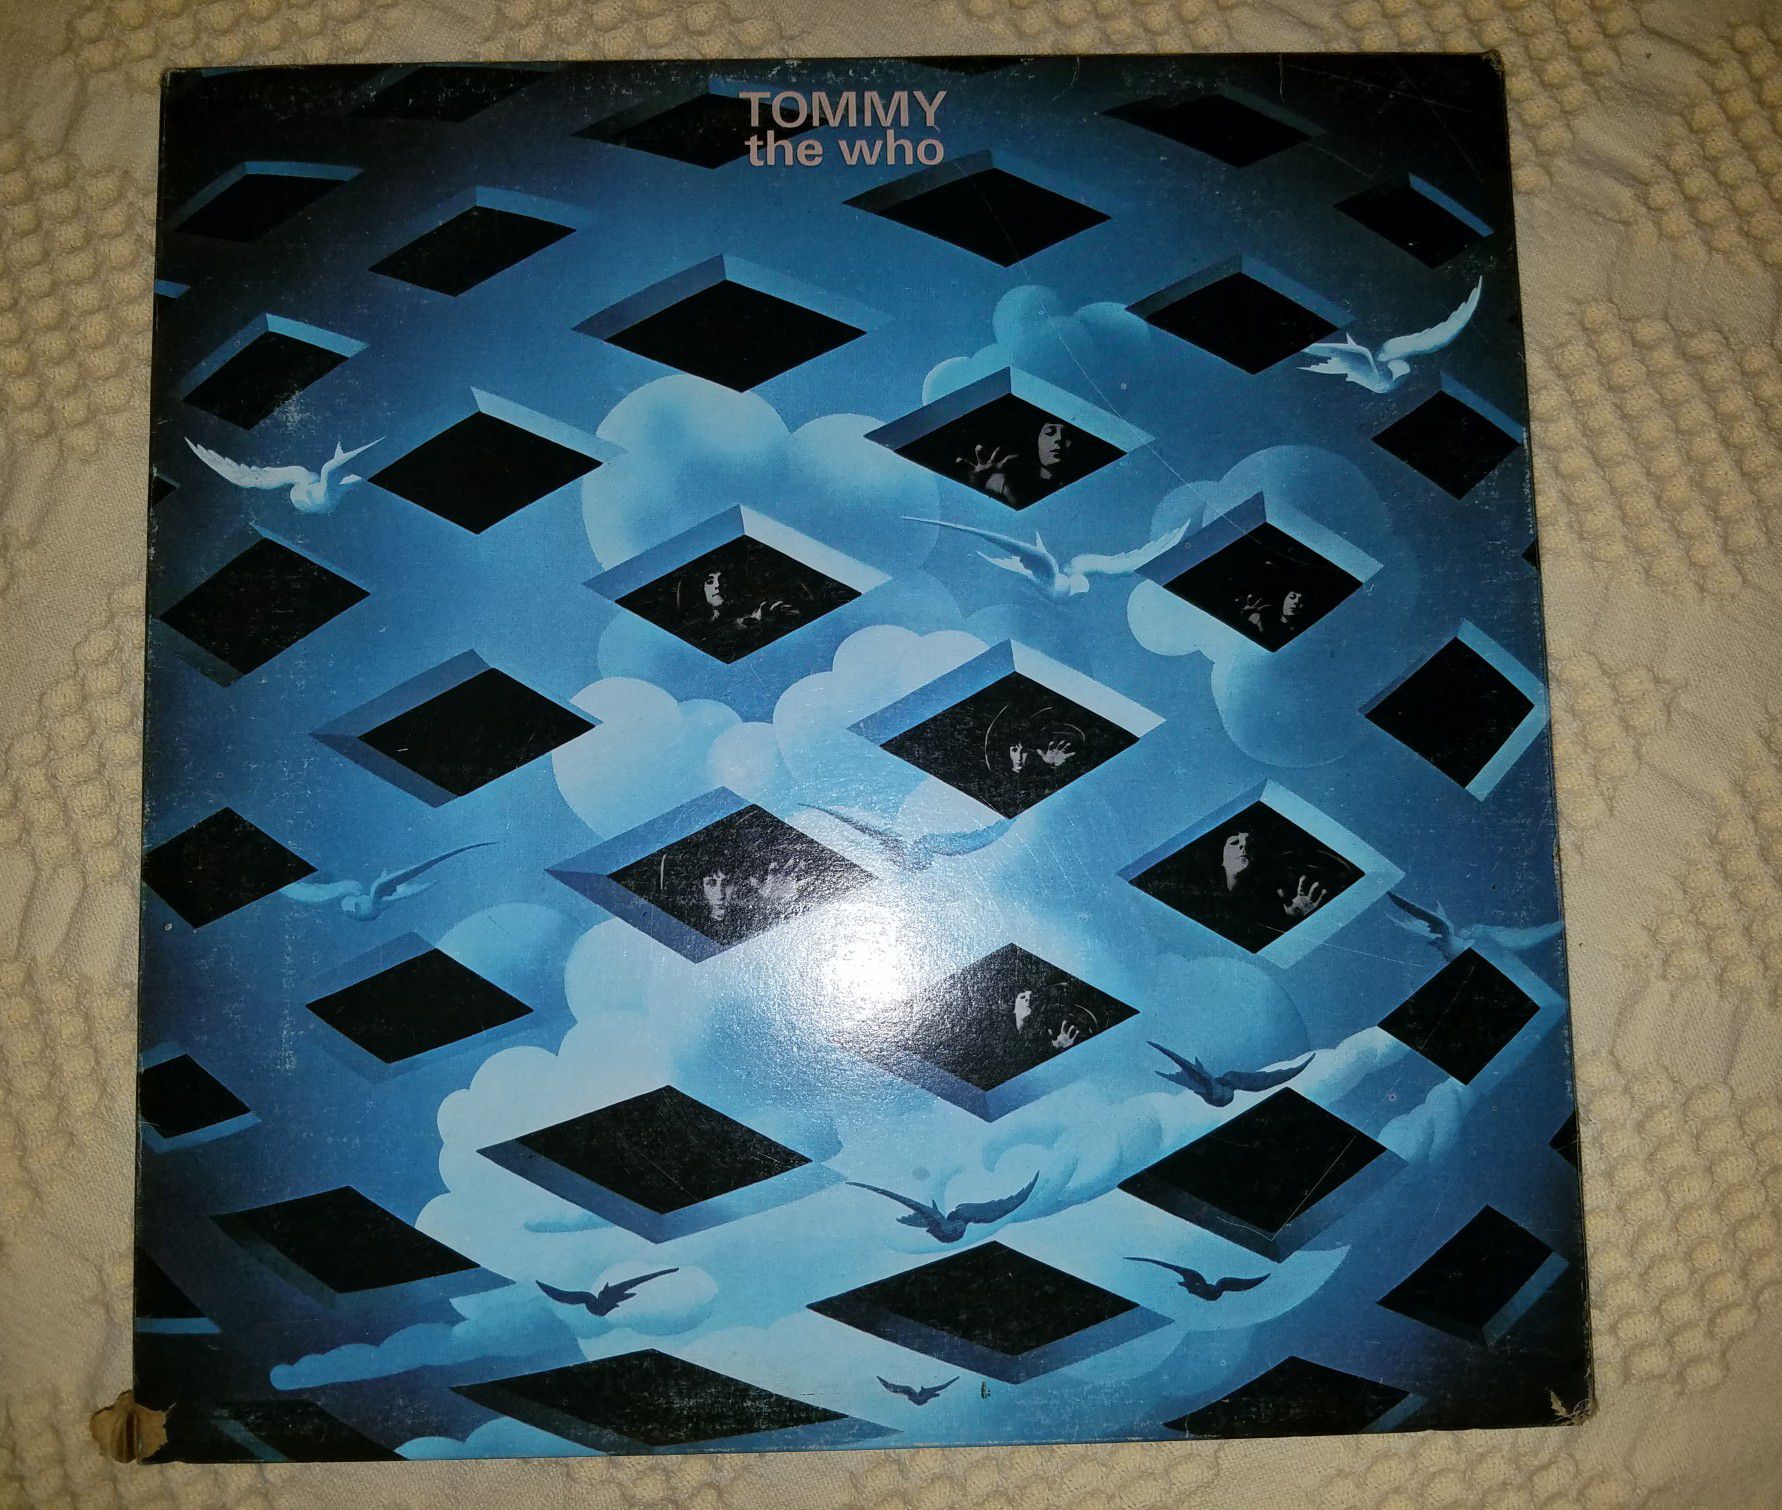 TOMMY THE WHO VINYL RECORD